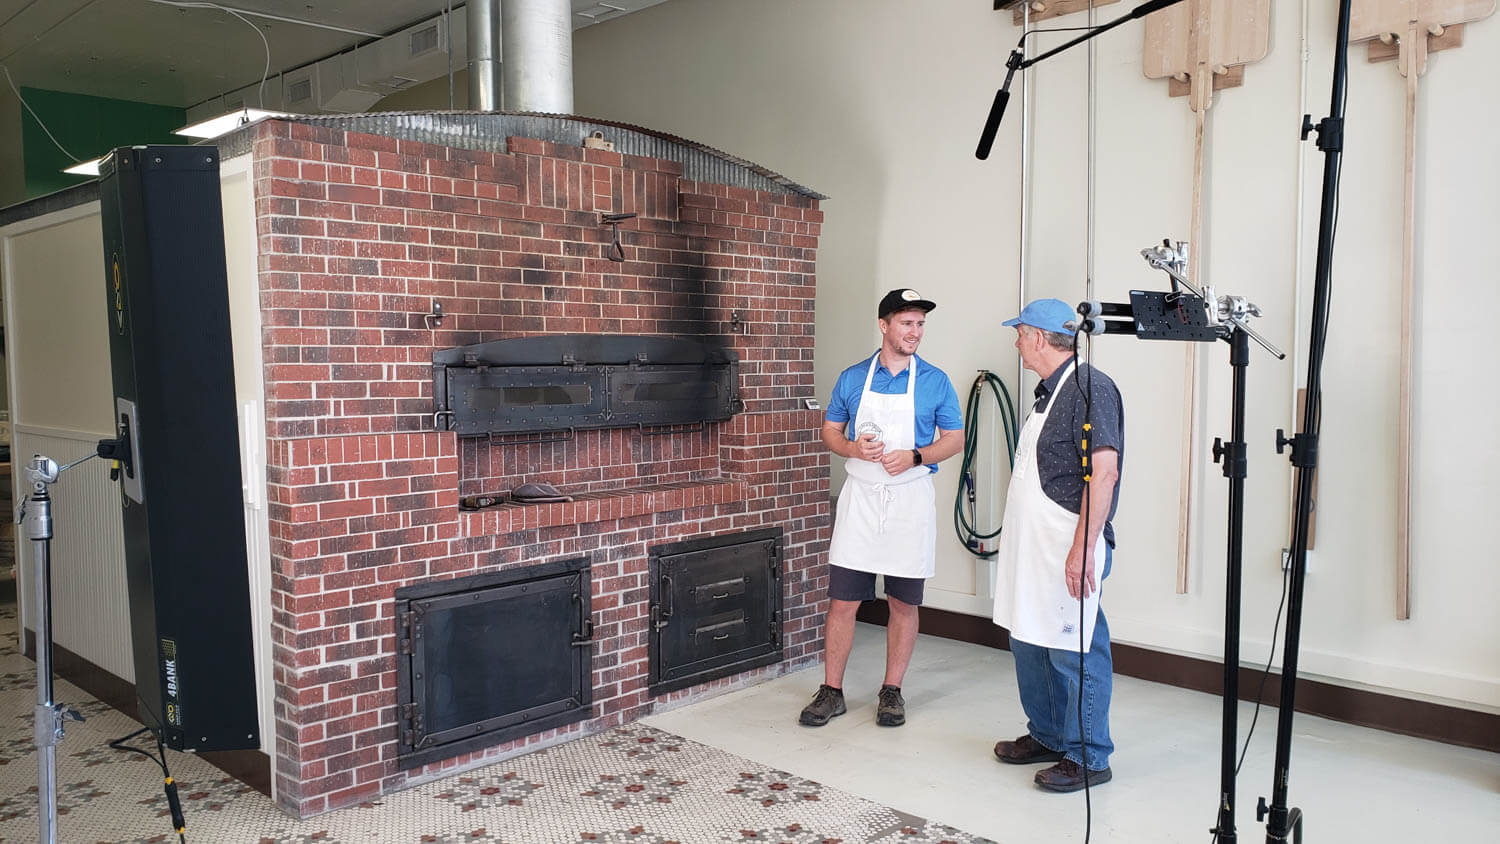 2 people standing in front of a giant brick oven